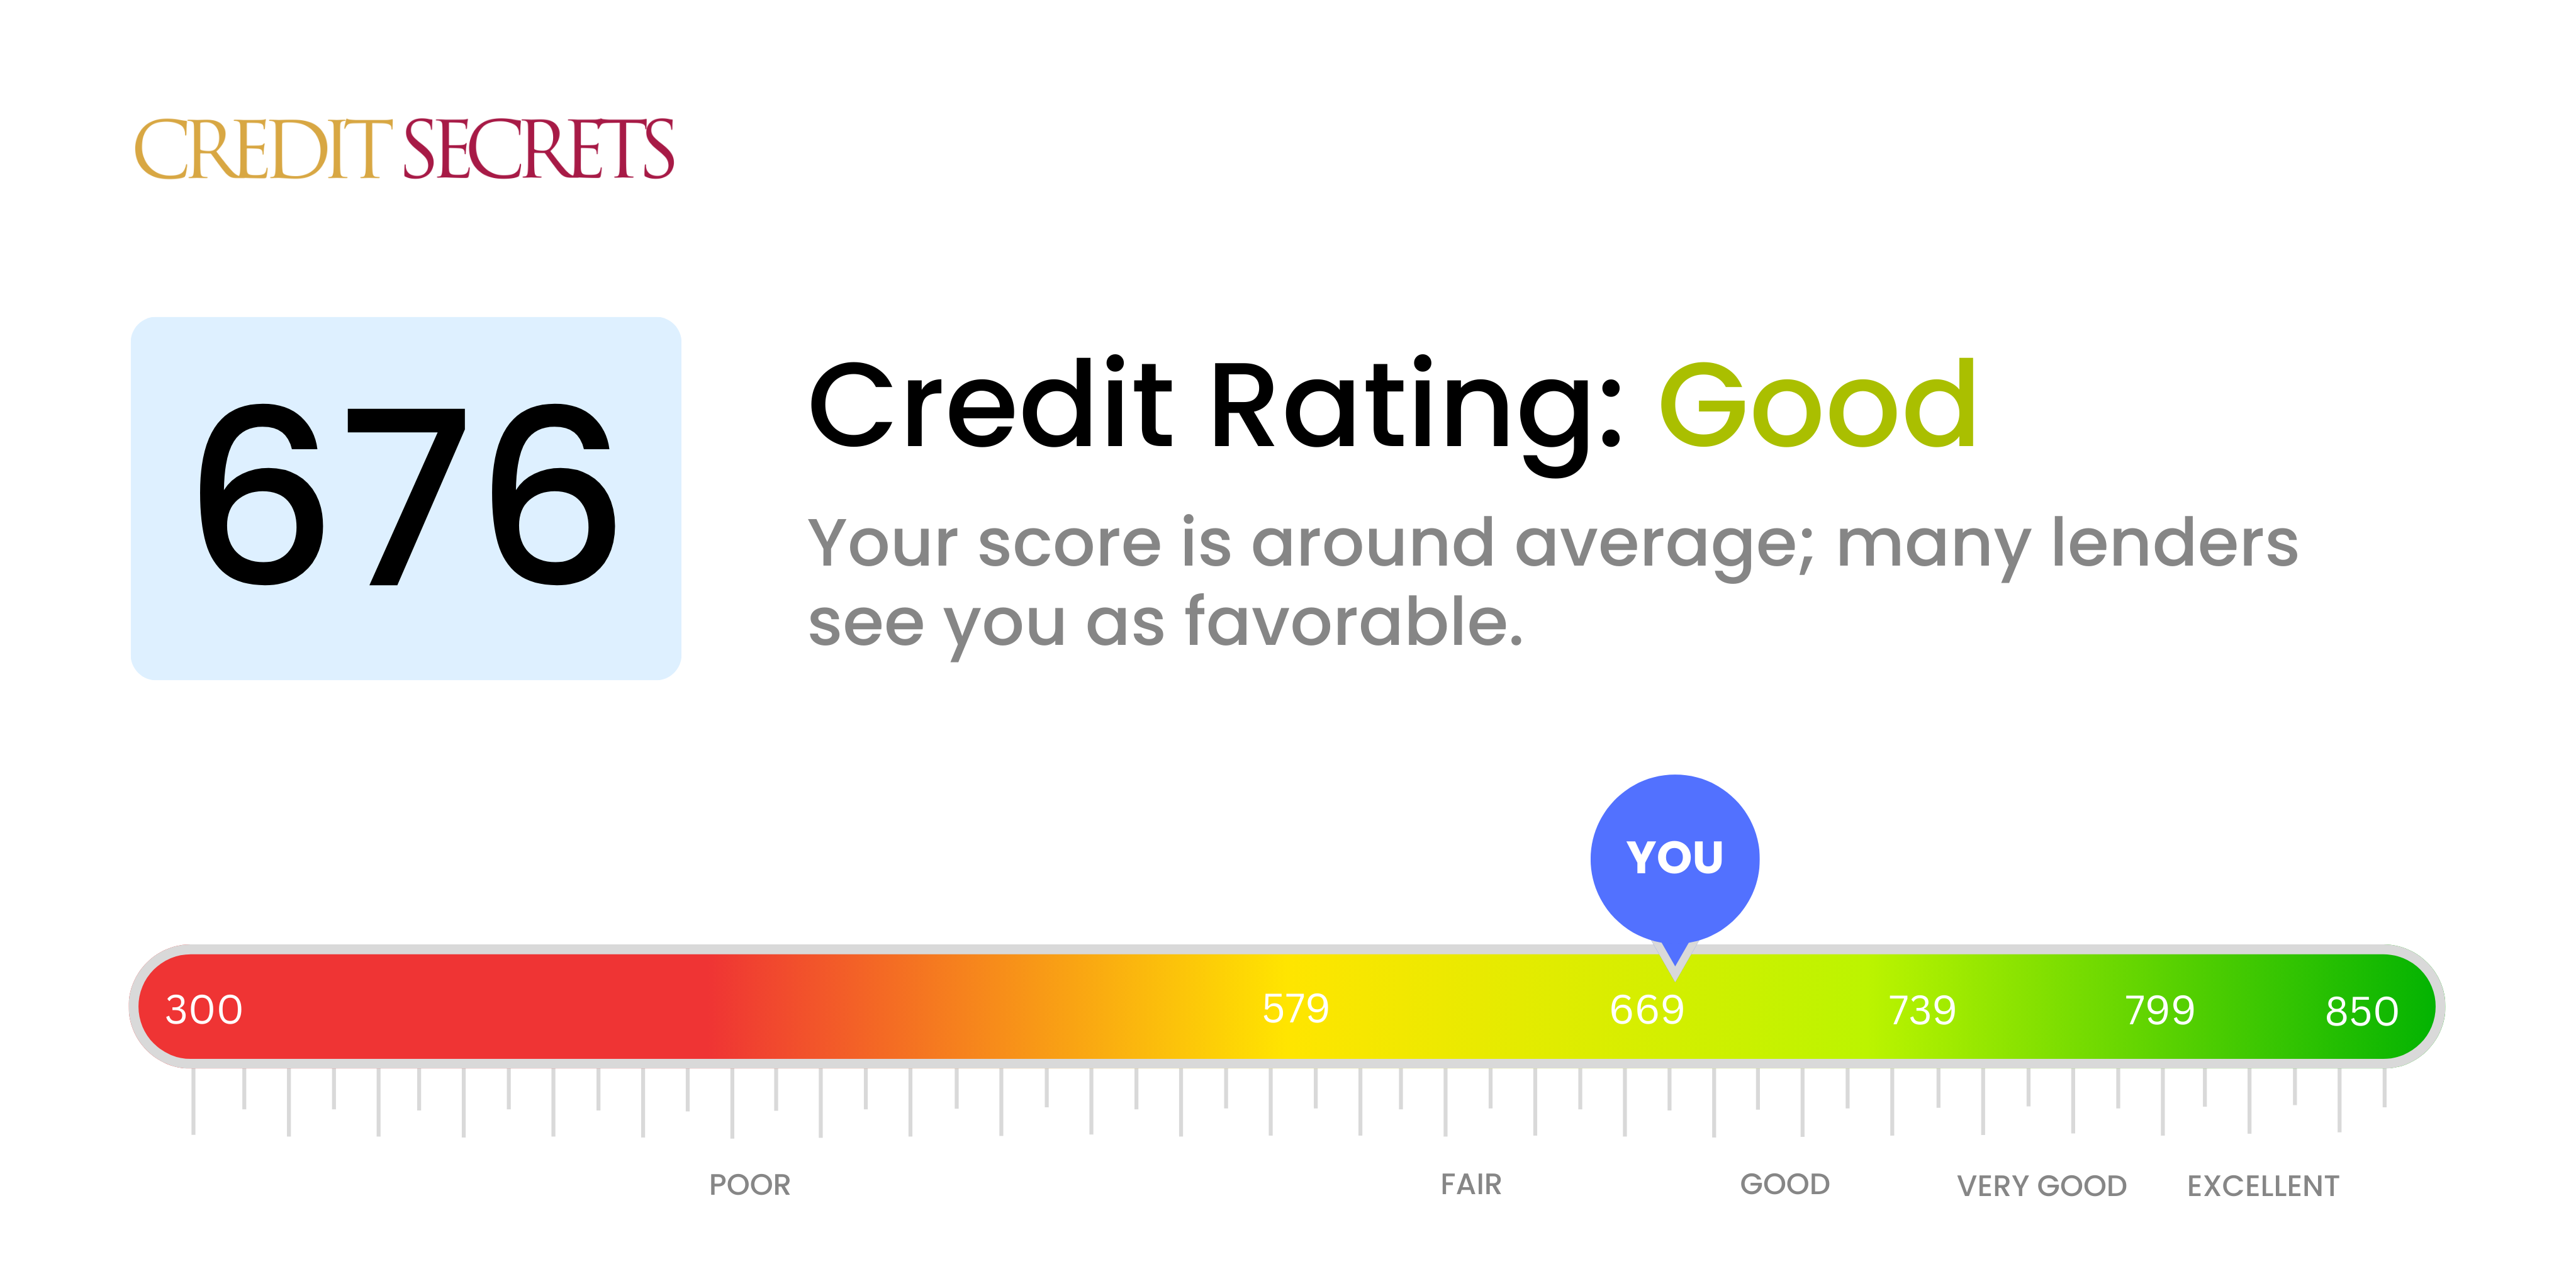 Is 676 a good credit score?